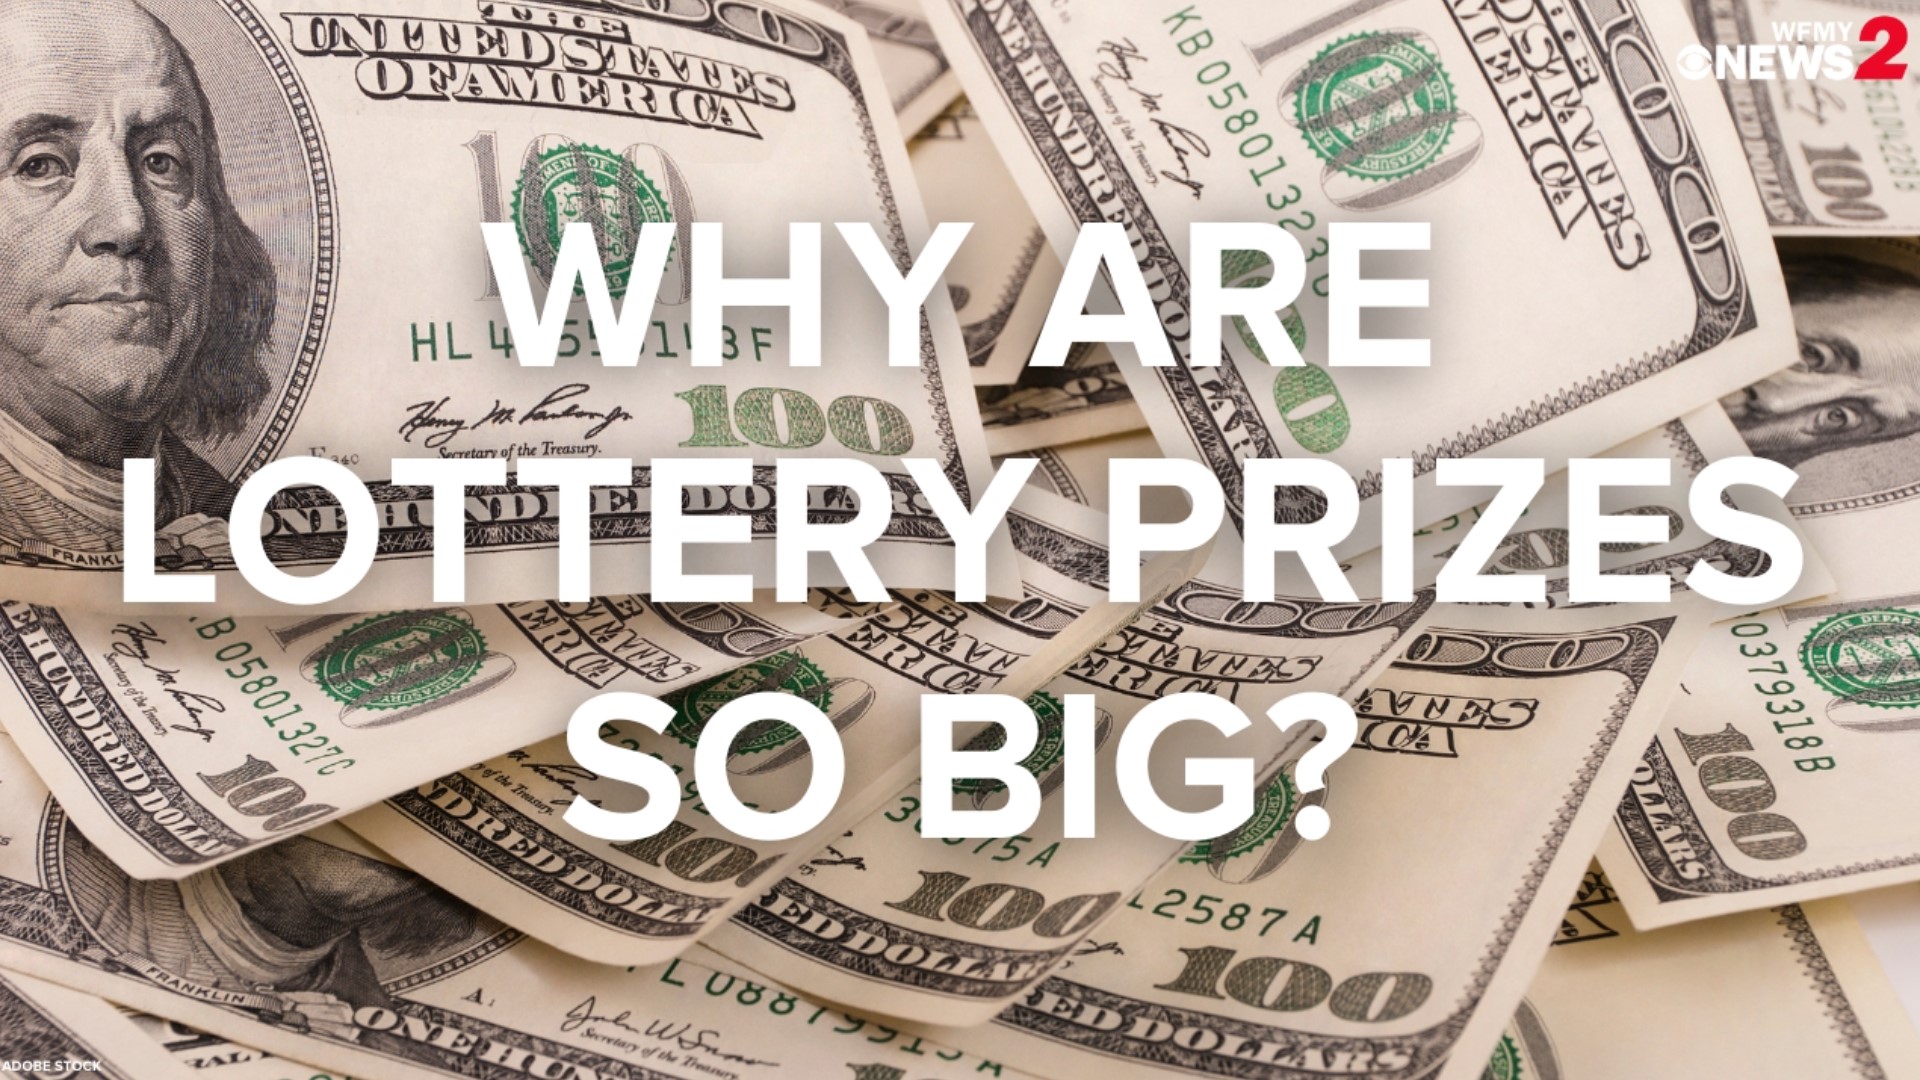 Experts said there are three reasons lottery prizes keep getting bigger.